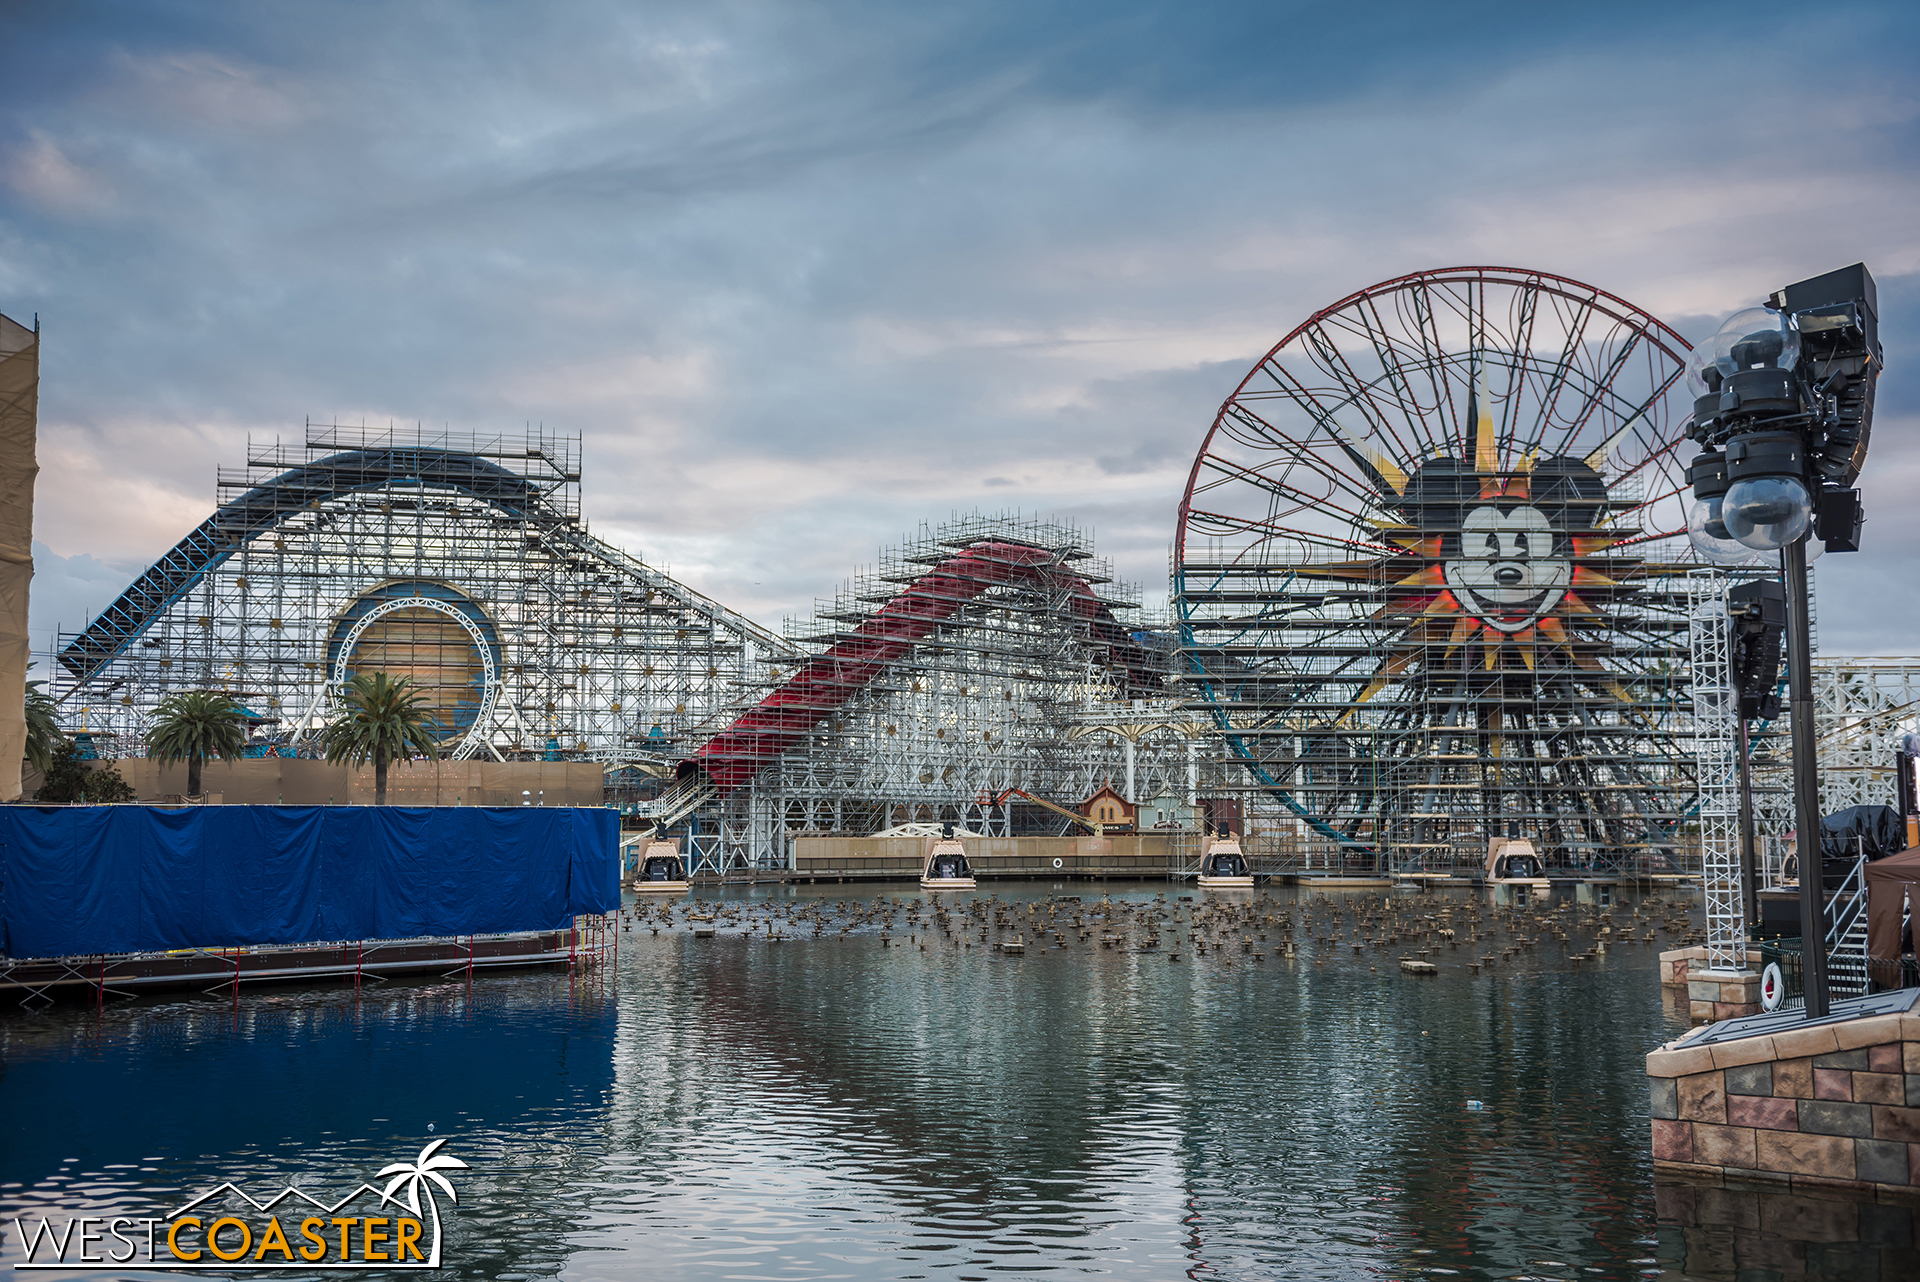  The Incredicoaster has seen its first noticeable change. 